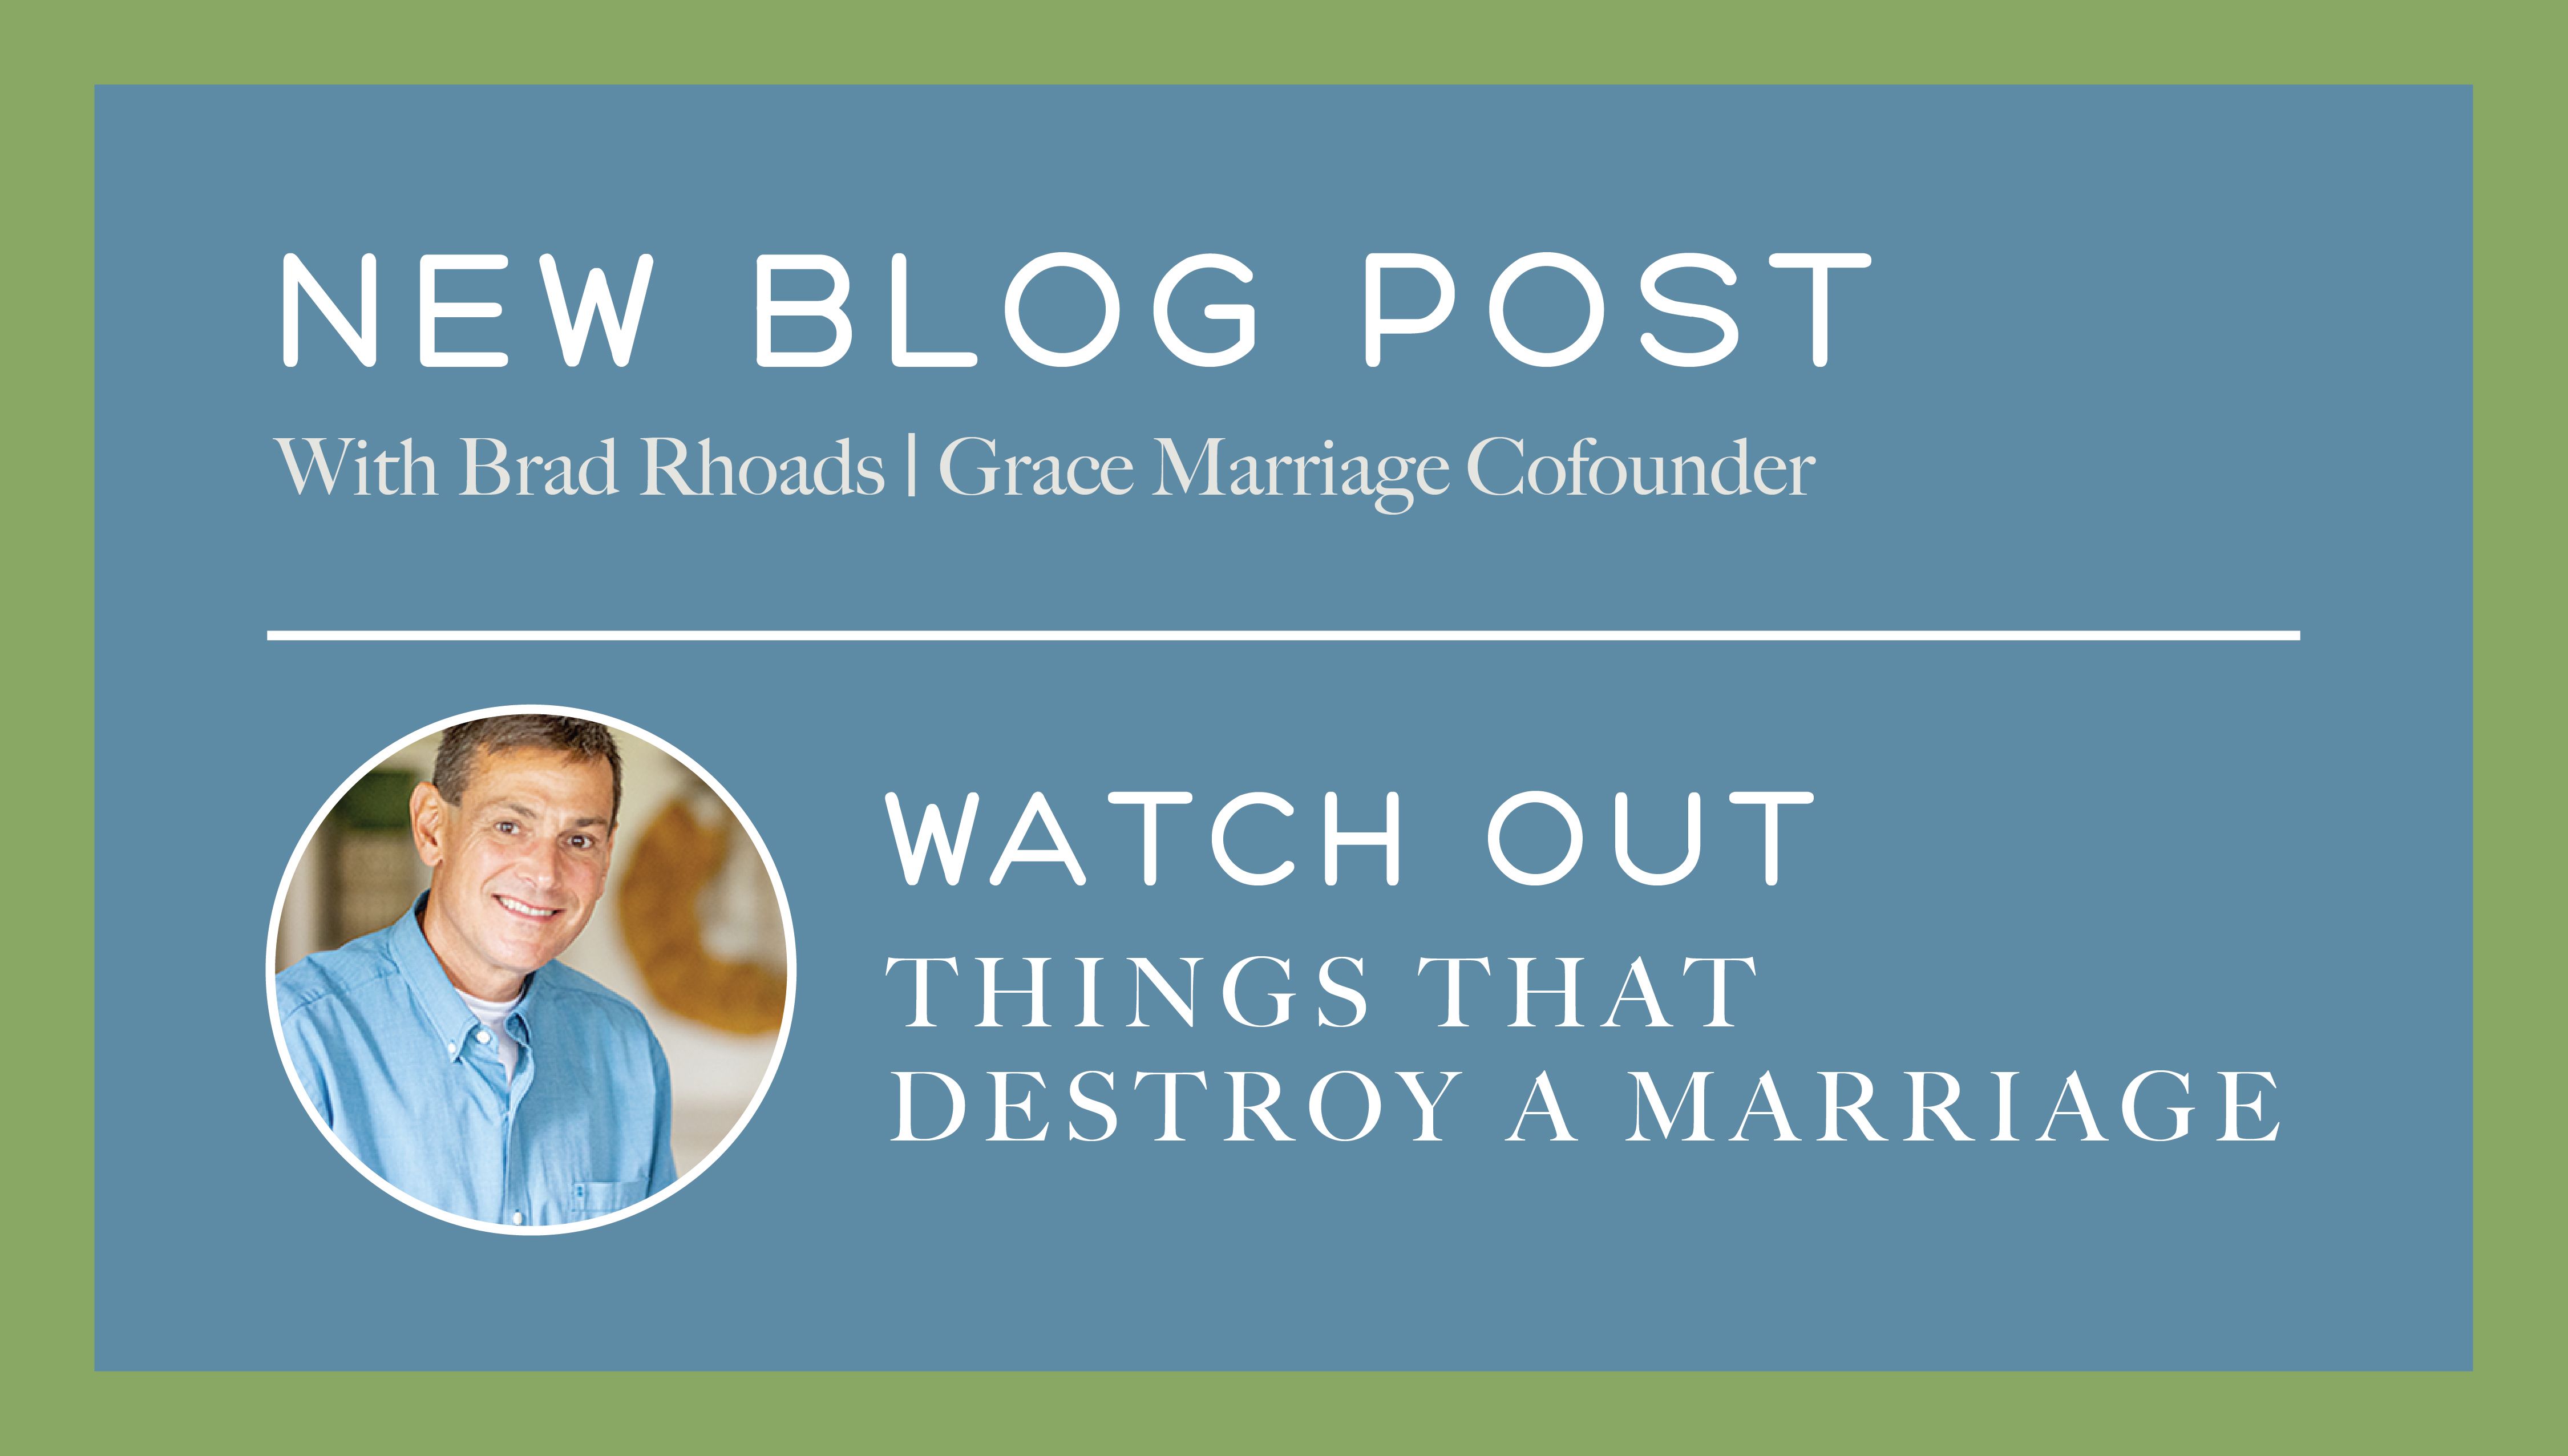 Watch Out: Things that Destroy a Marriage